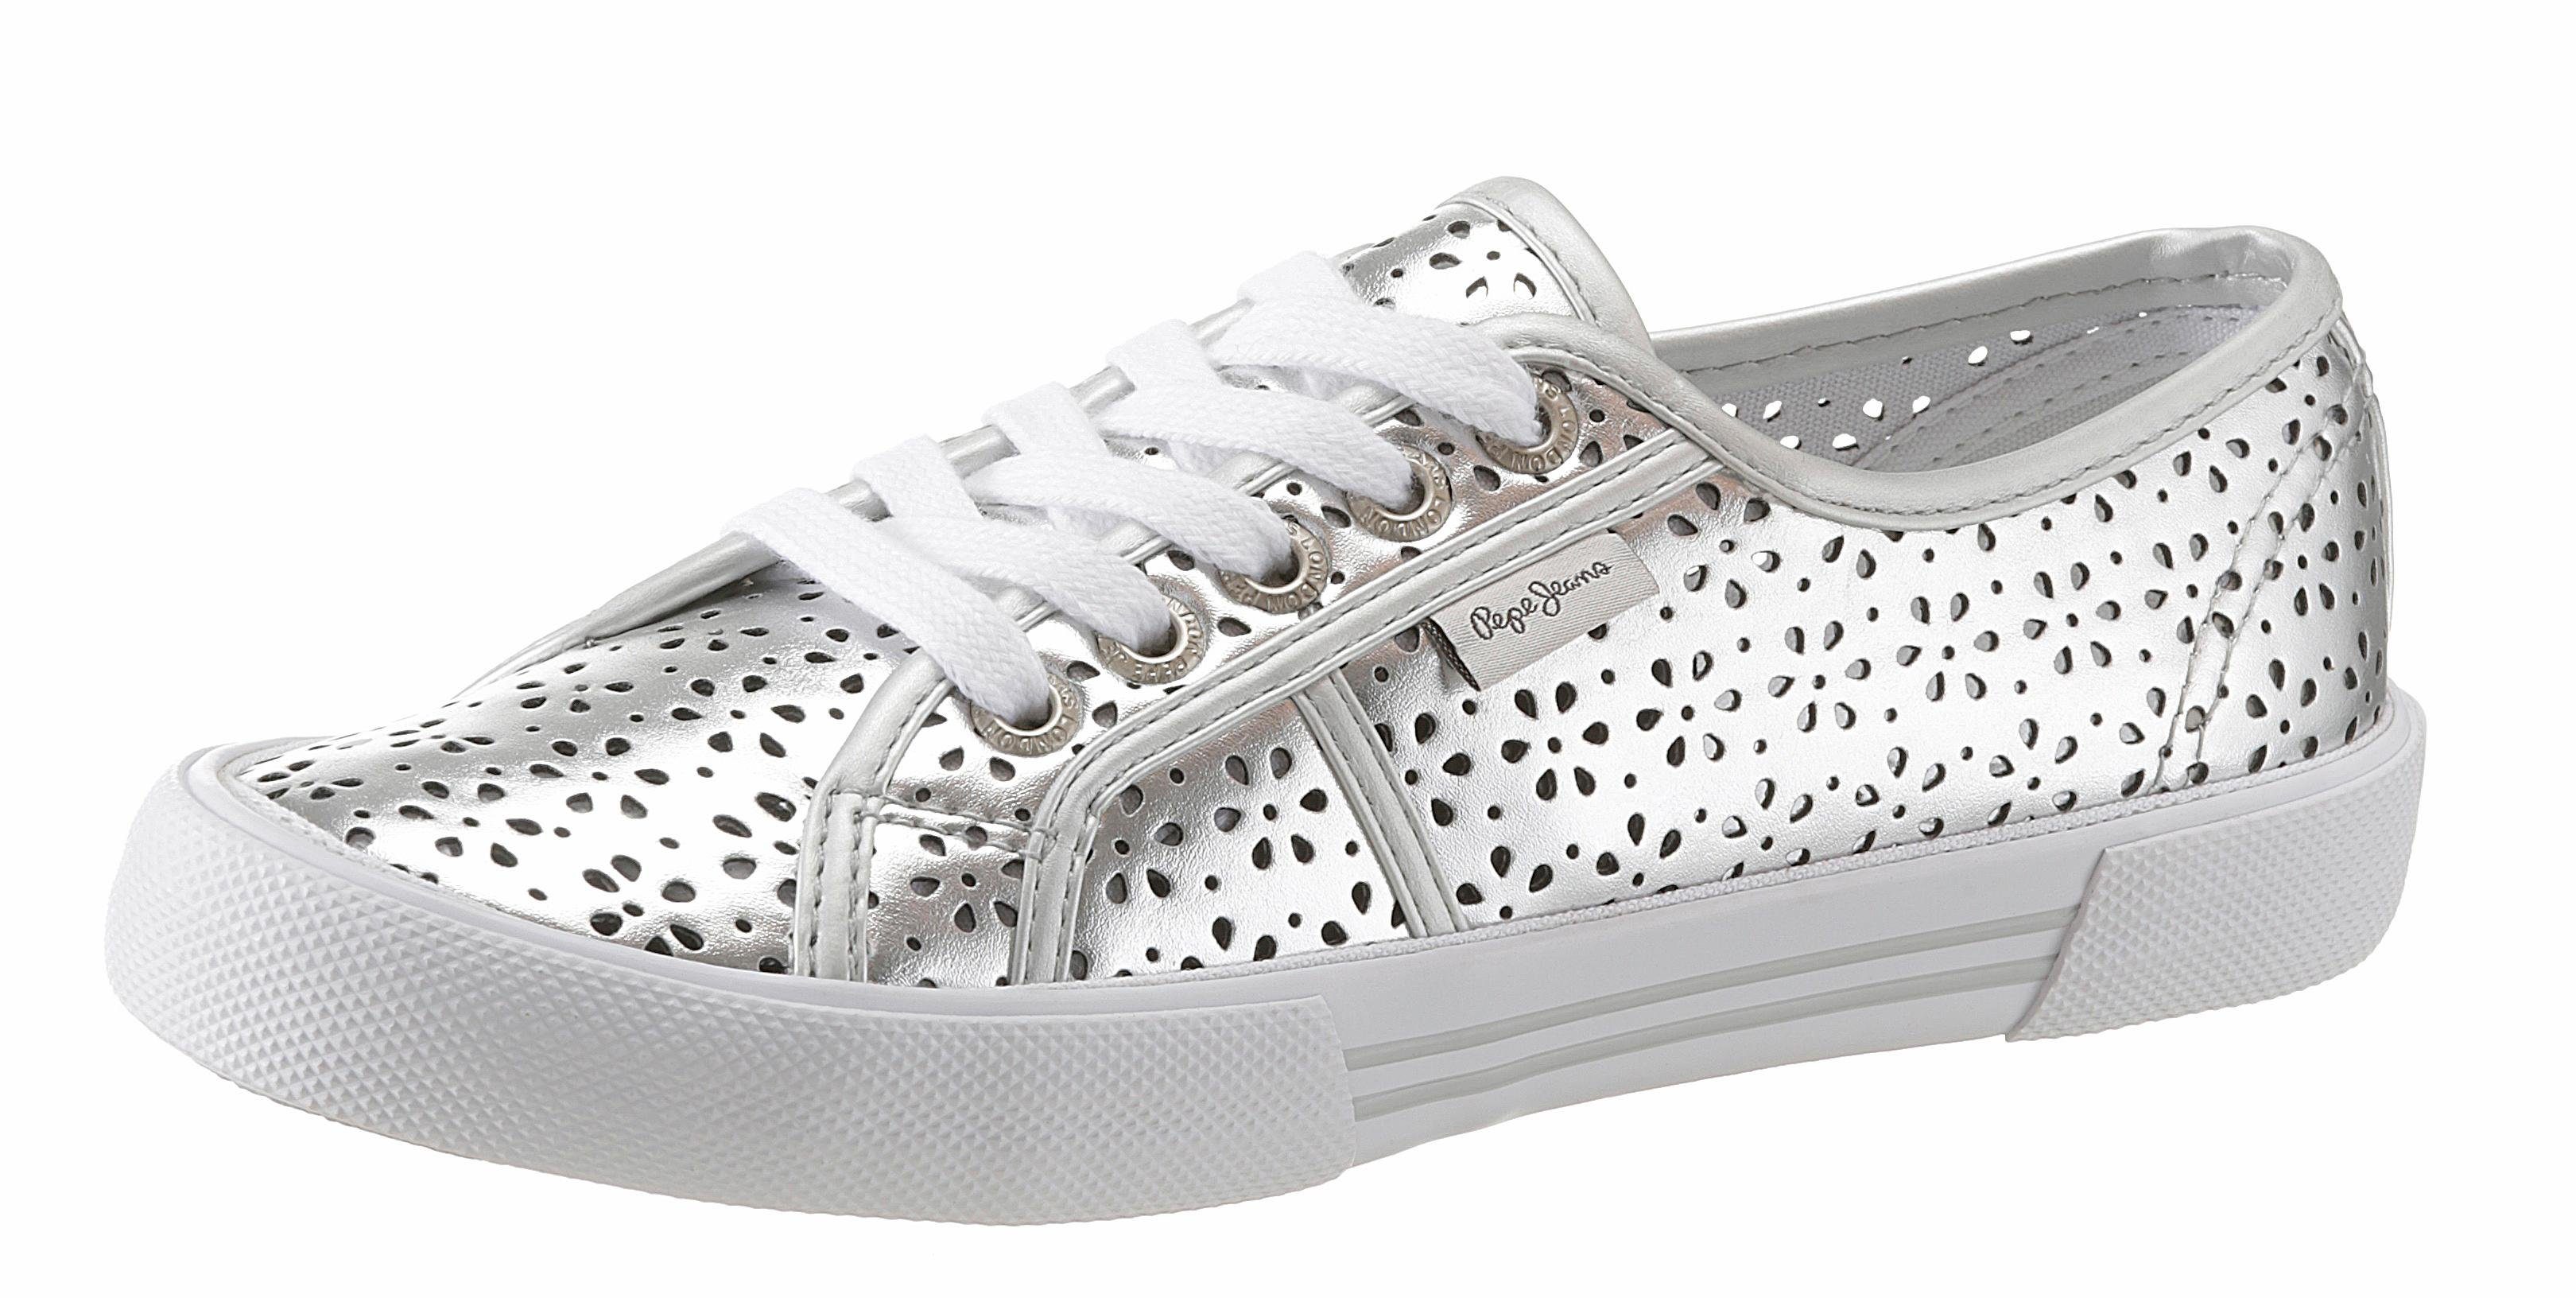 Pepe Jeans NU 15% KORTING: Pepe Jeans sneakers ABERLADY DAISY